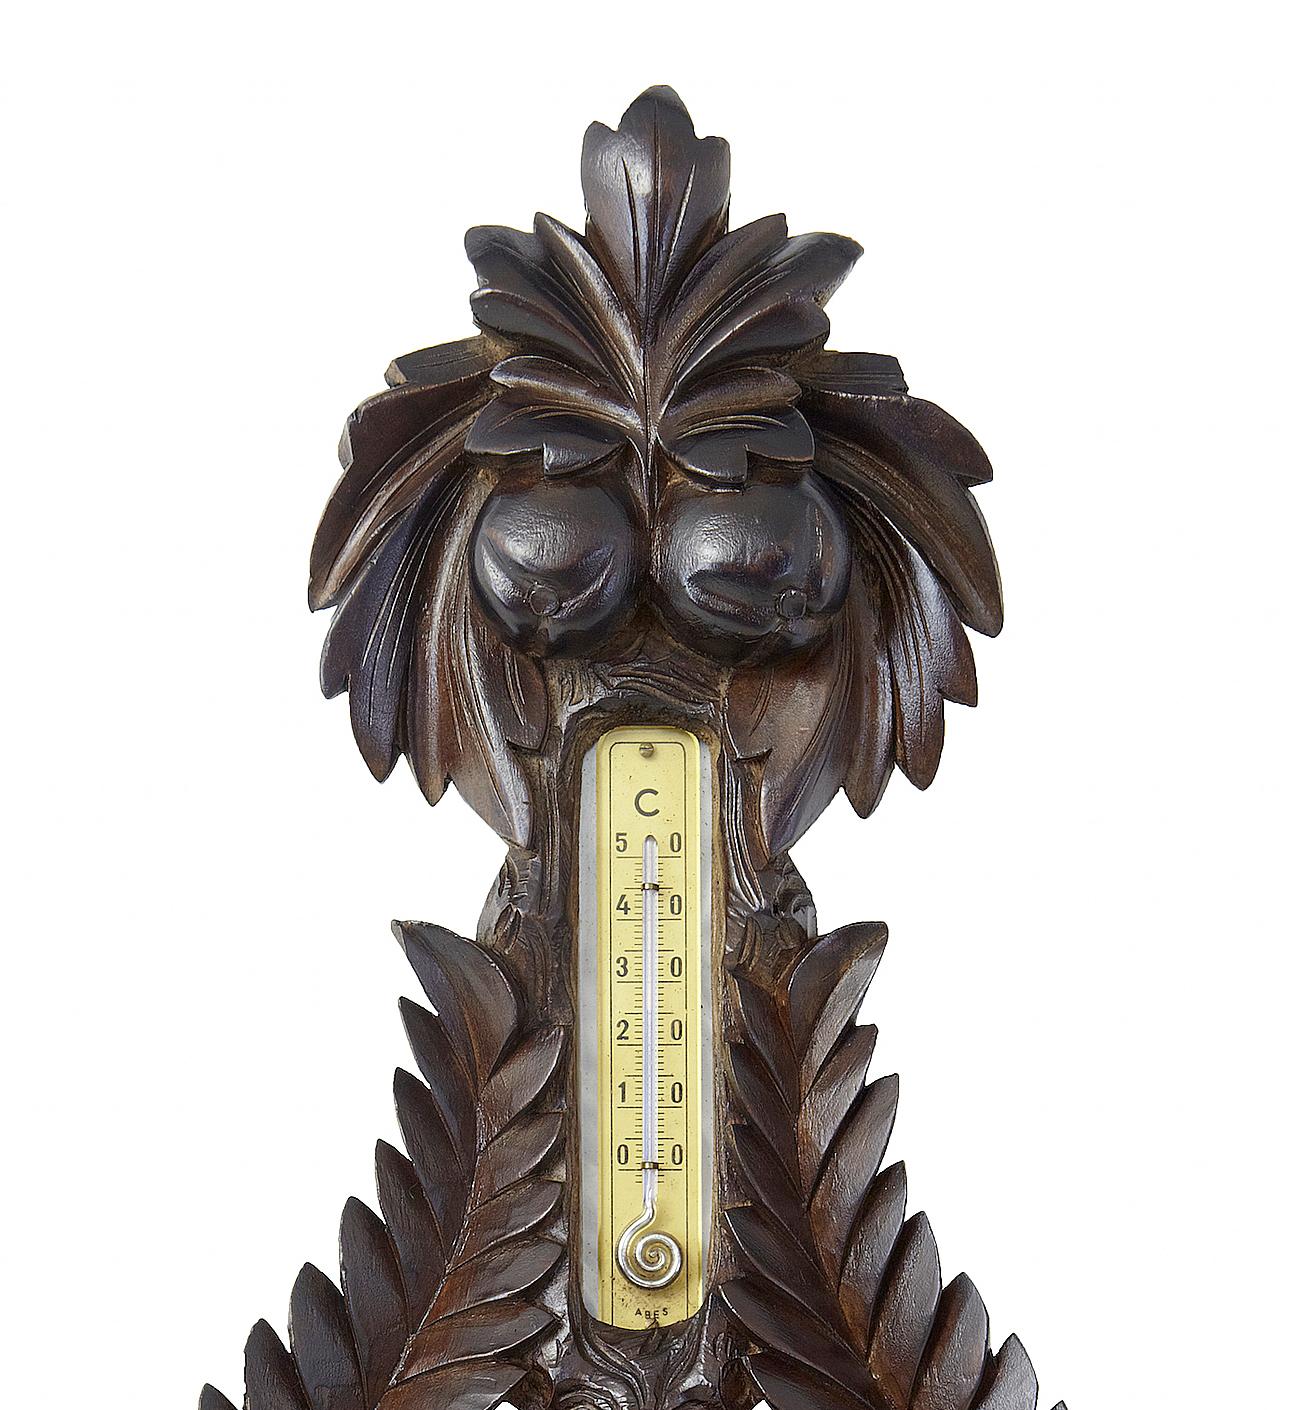 19th century Danish carved walnut barometer, circa 1890.

Beautifully carved from a solid piece of wood. Thermometer set in the top. Barometer with paper dial in Danish.

Some losses to carving on outer edge, signs of water damage to the paper